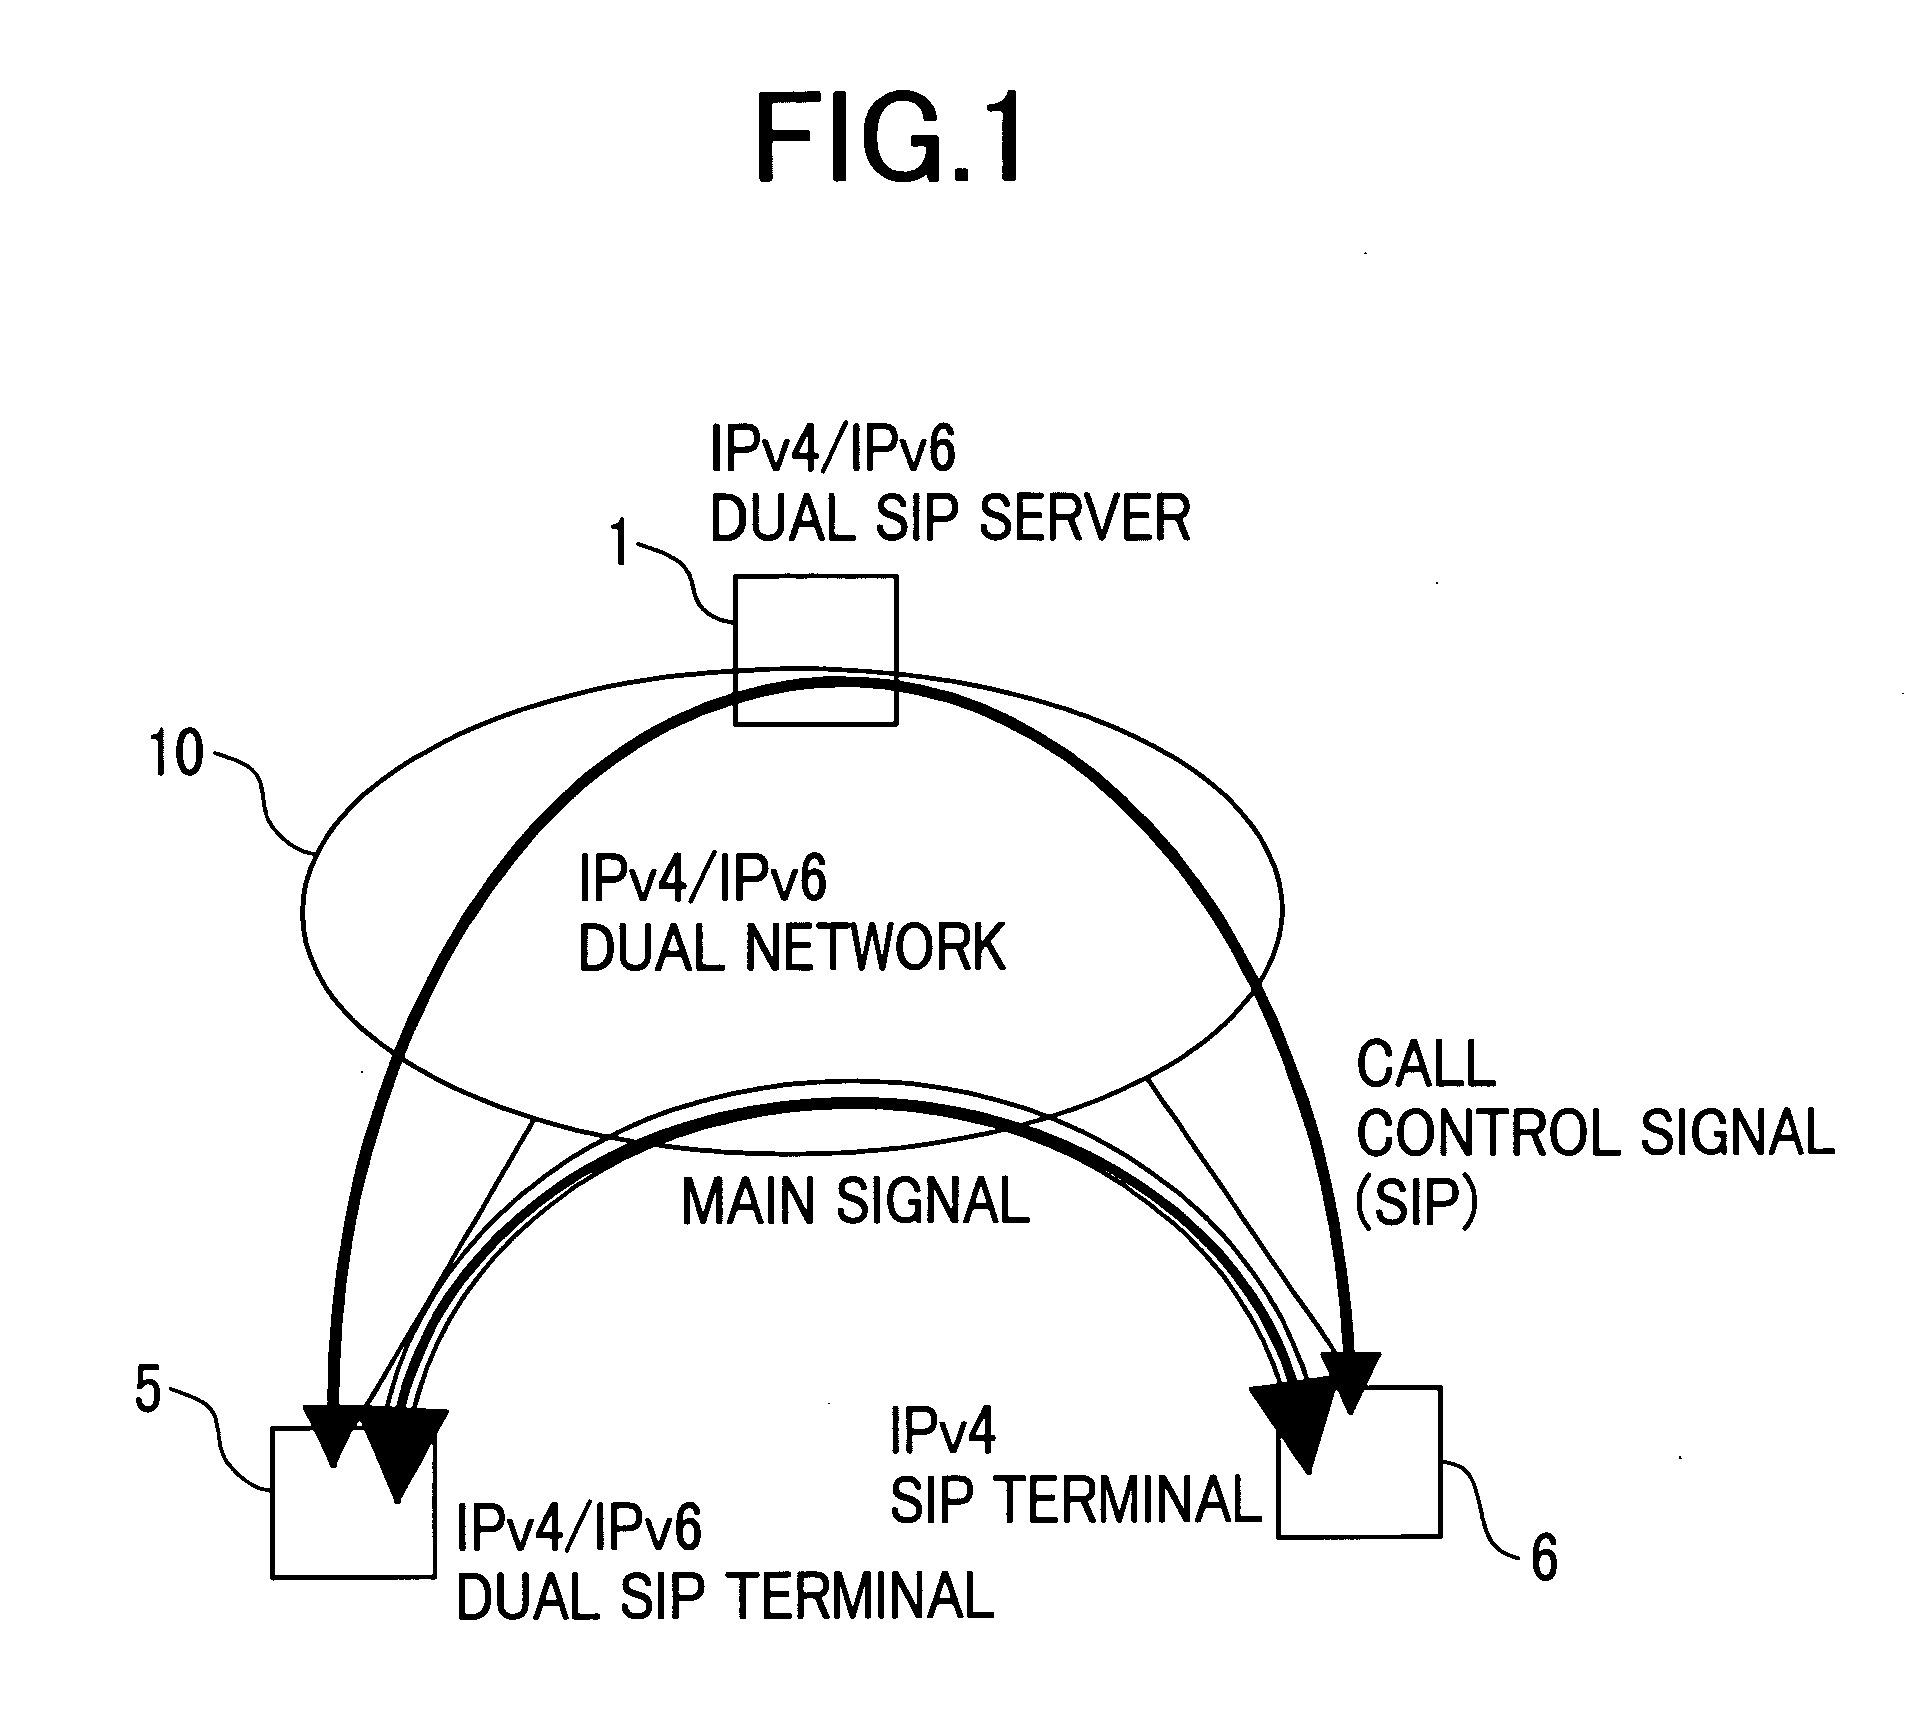 Session control system, communication terminal and servers